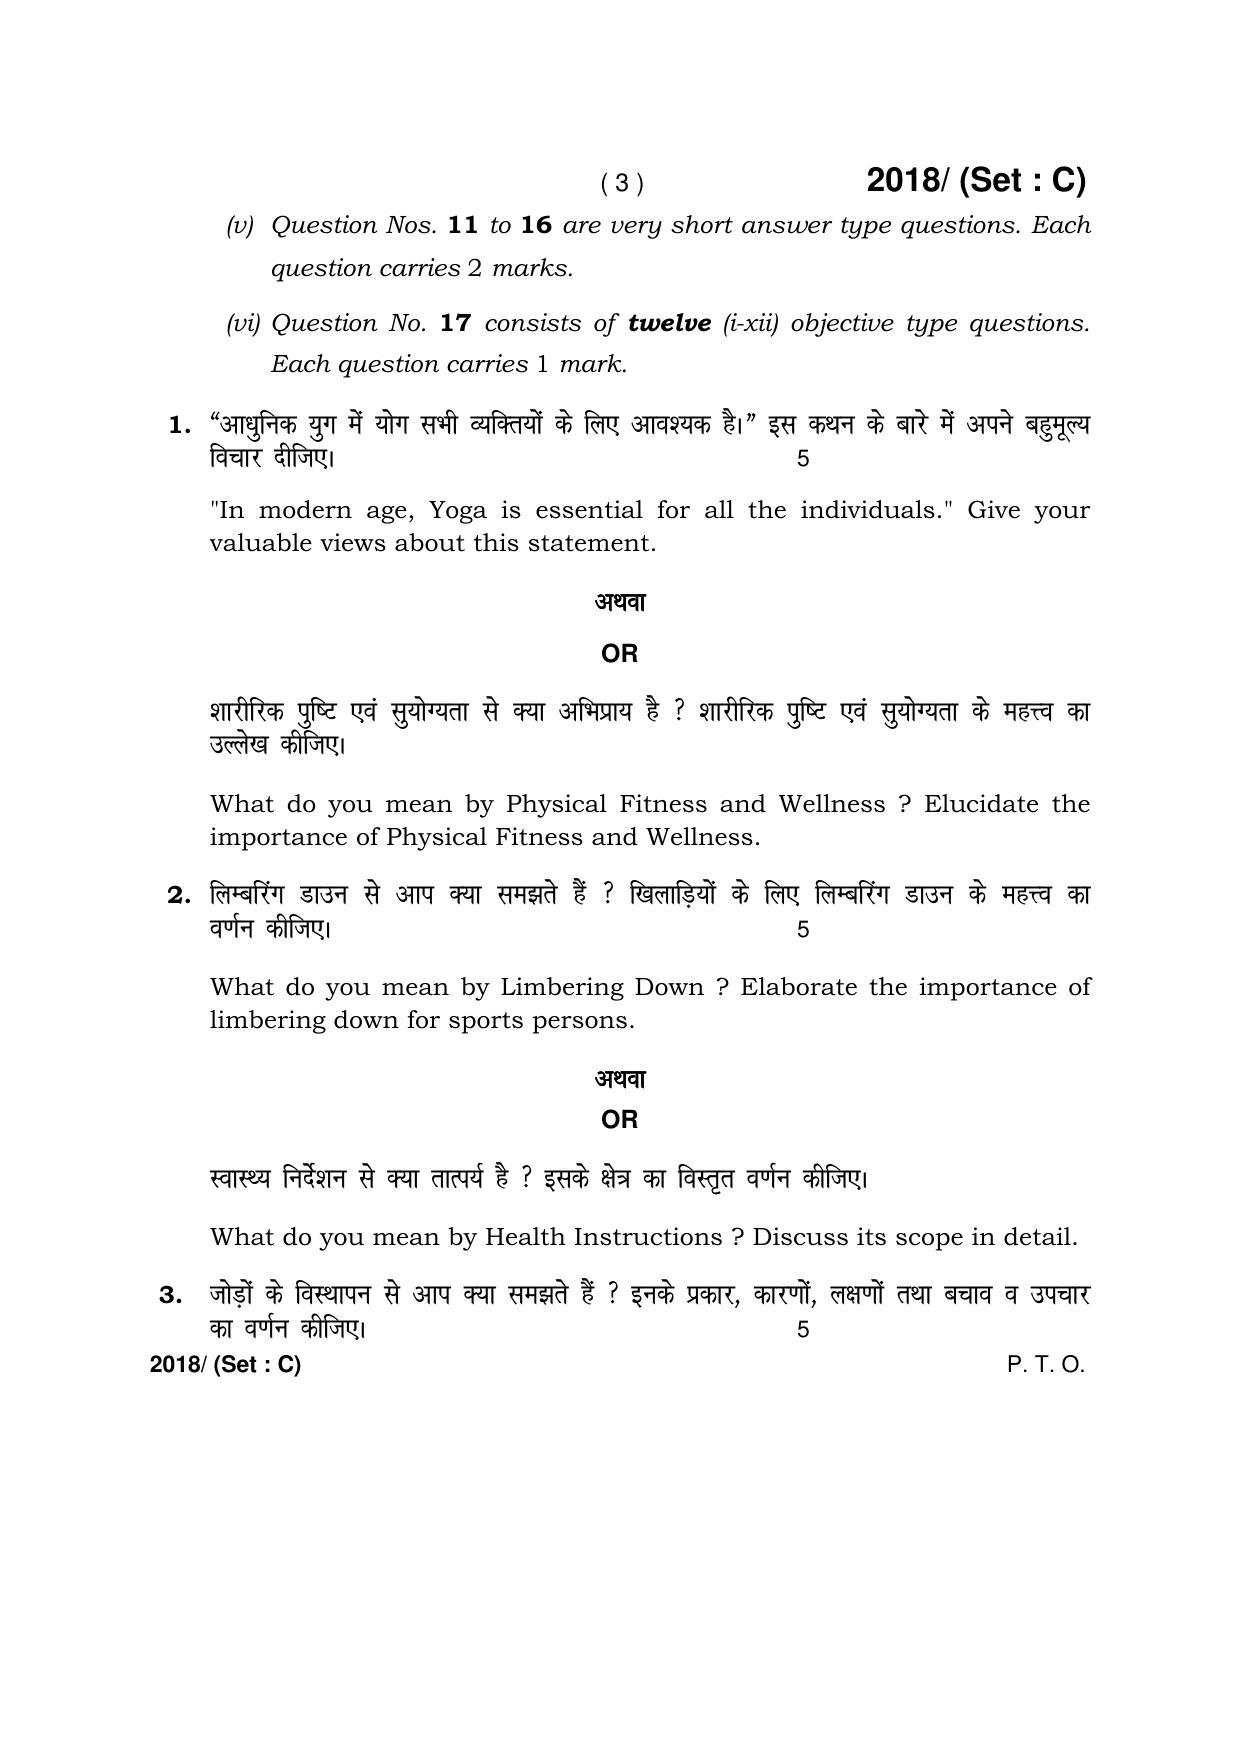 Haryana Board HBSE Class 12 Physical Education -C 2017 Question Paper - Page 3